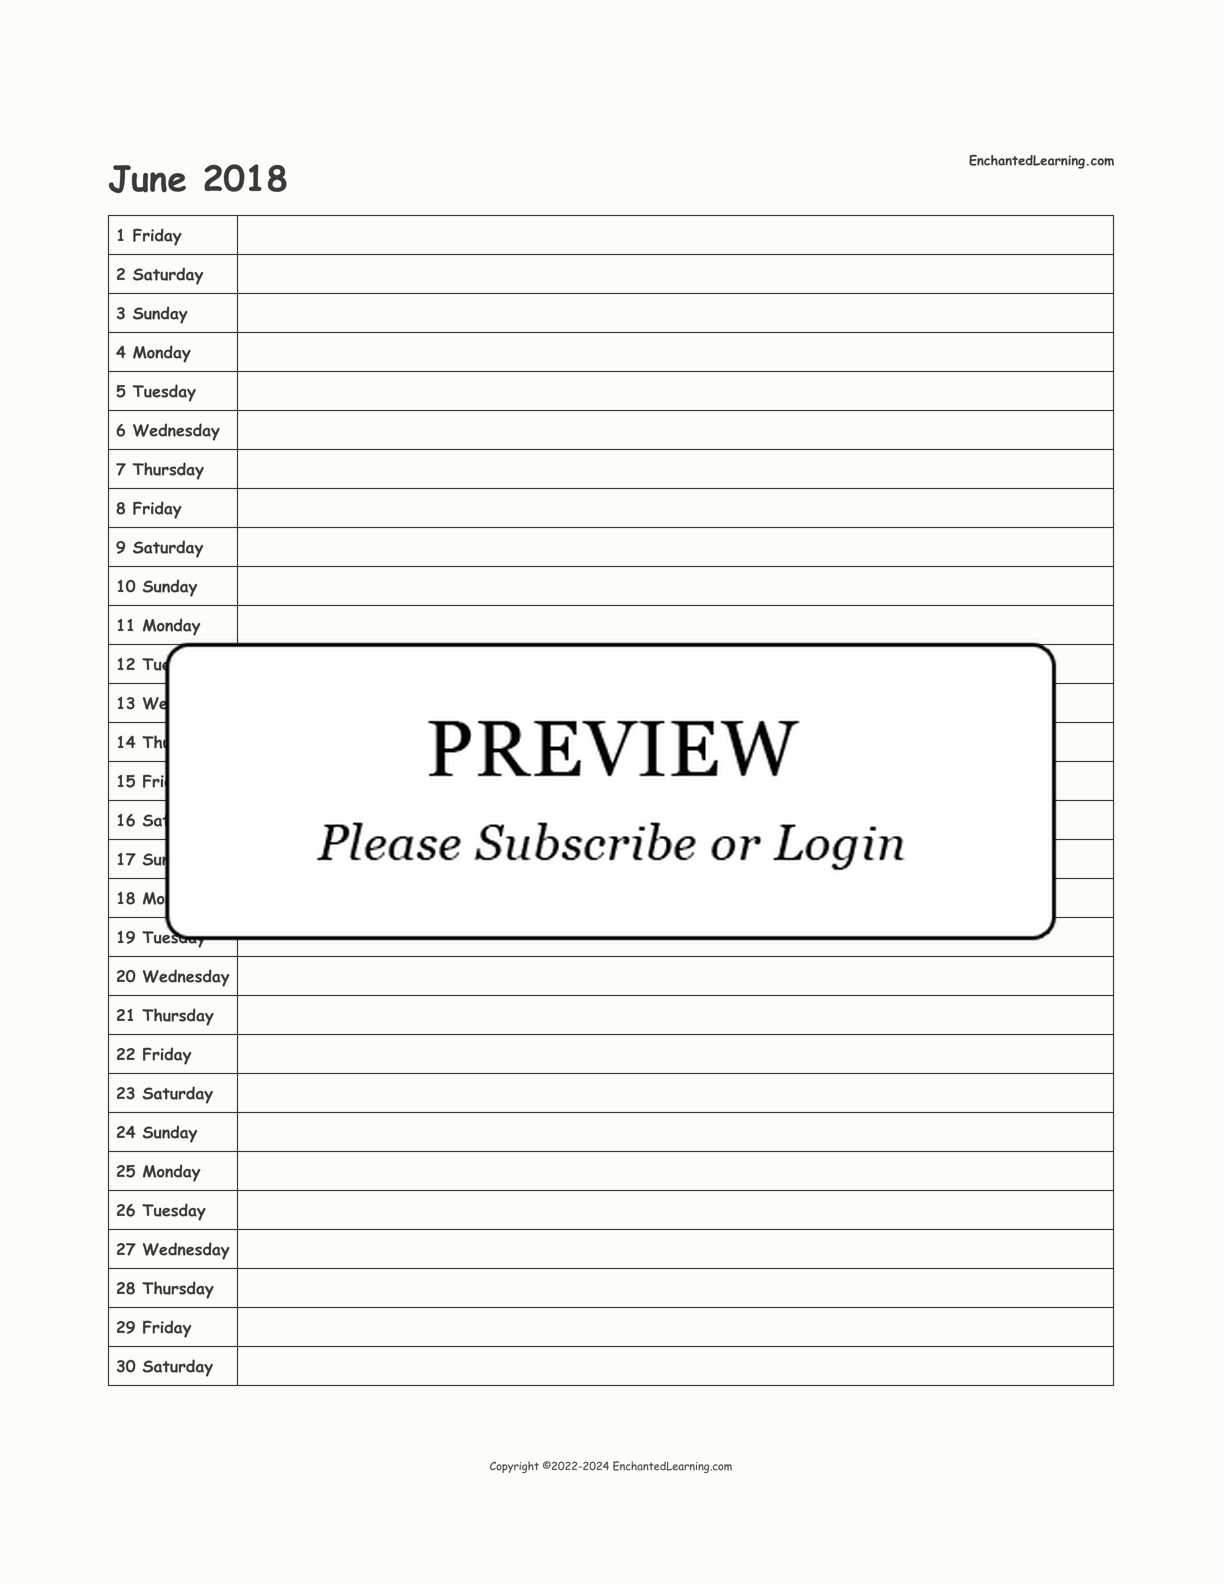 2018 Scheduling Calendar interactive printout page 6